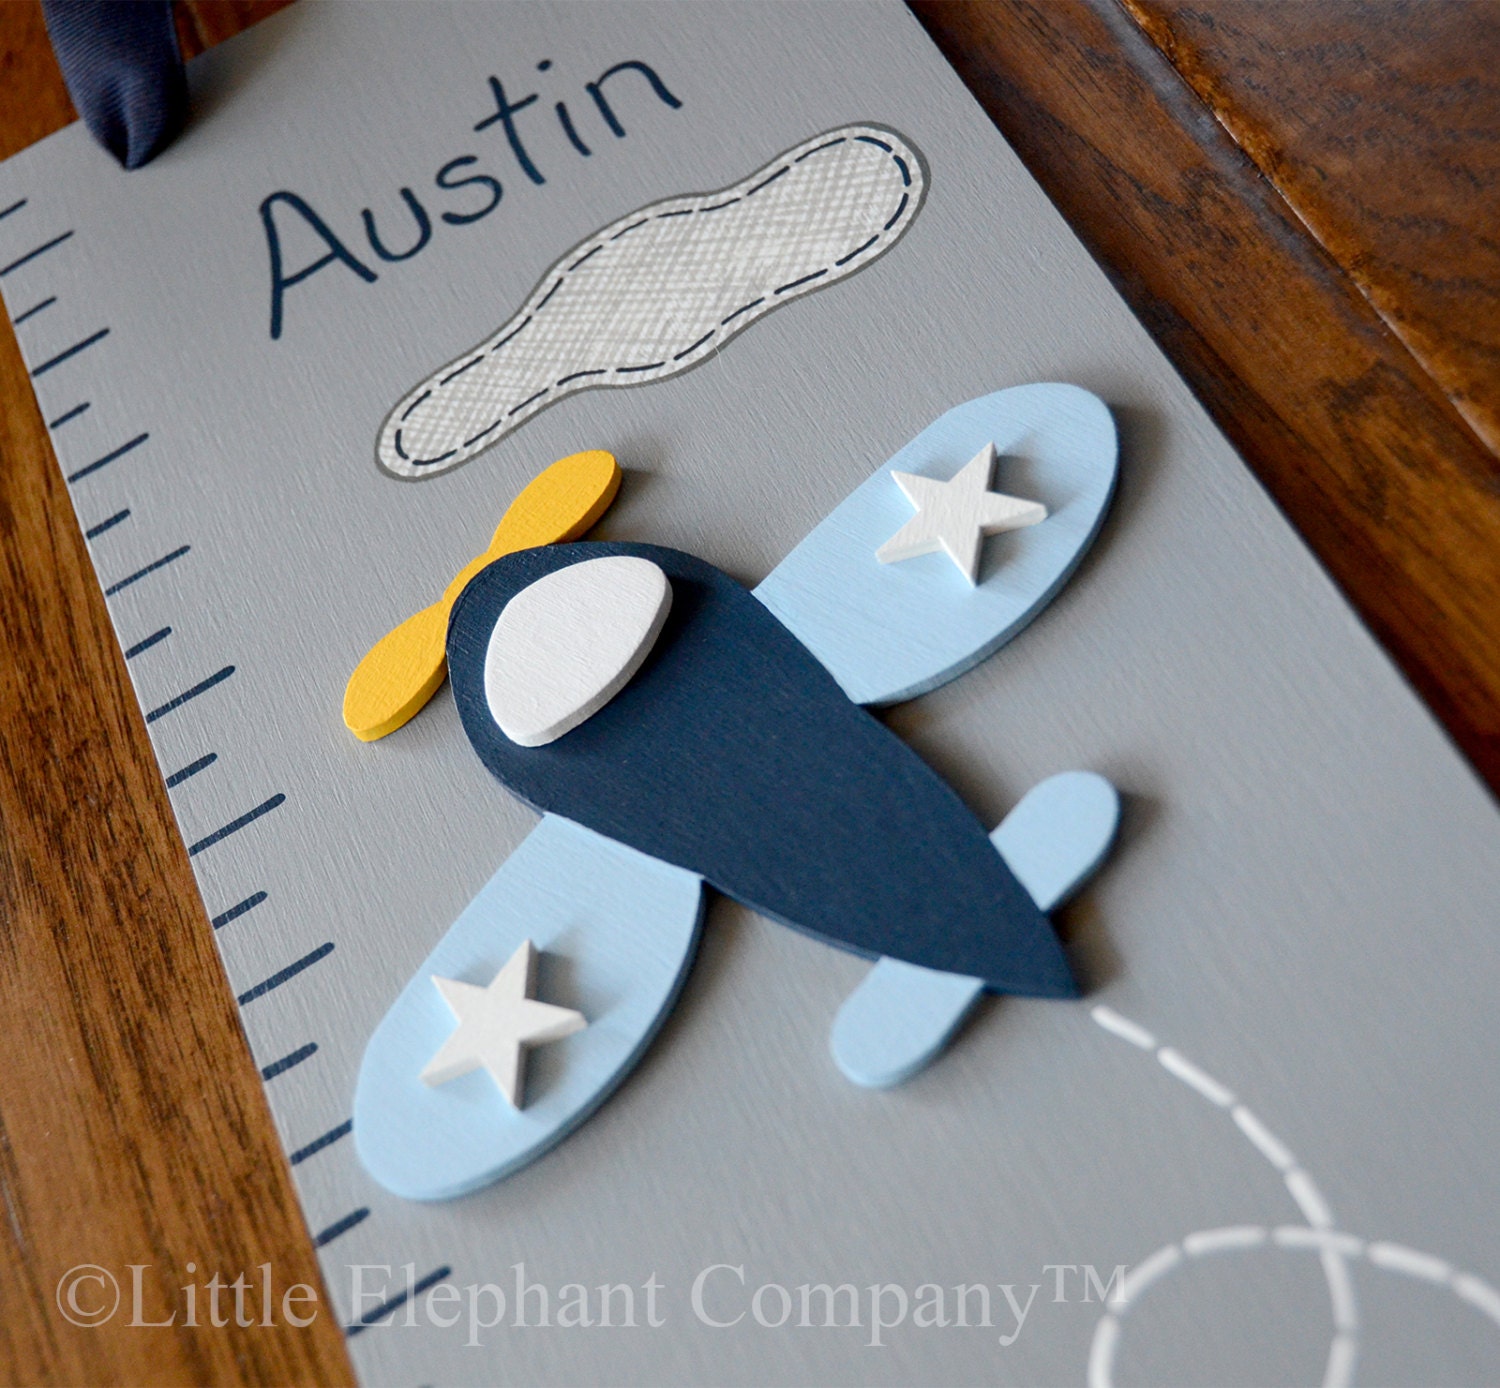 Vintage Airplane Wooden Growth Chart, handpainted, FREE nail cover and personalization - LittleElephantCo